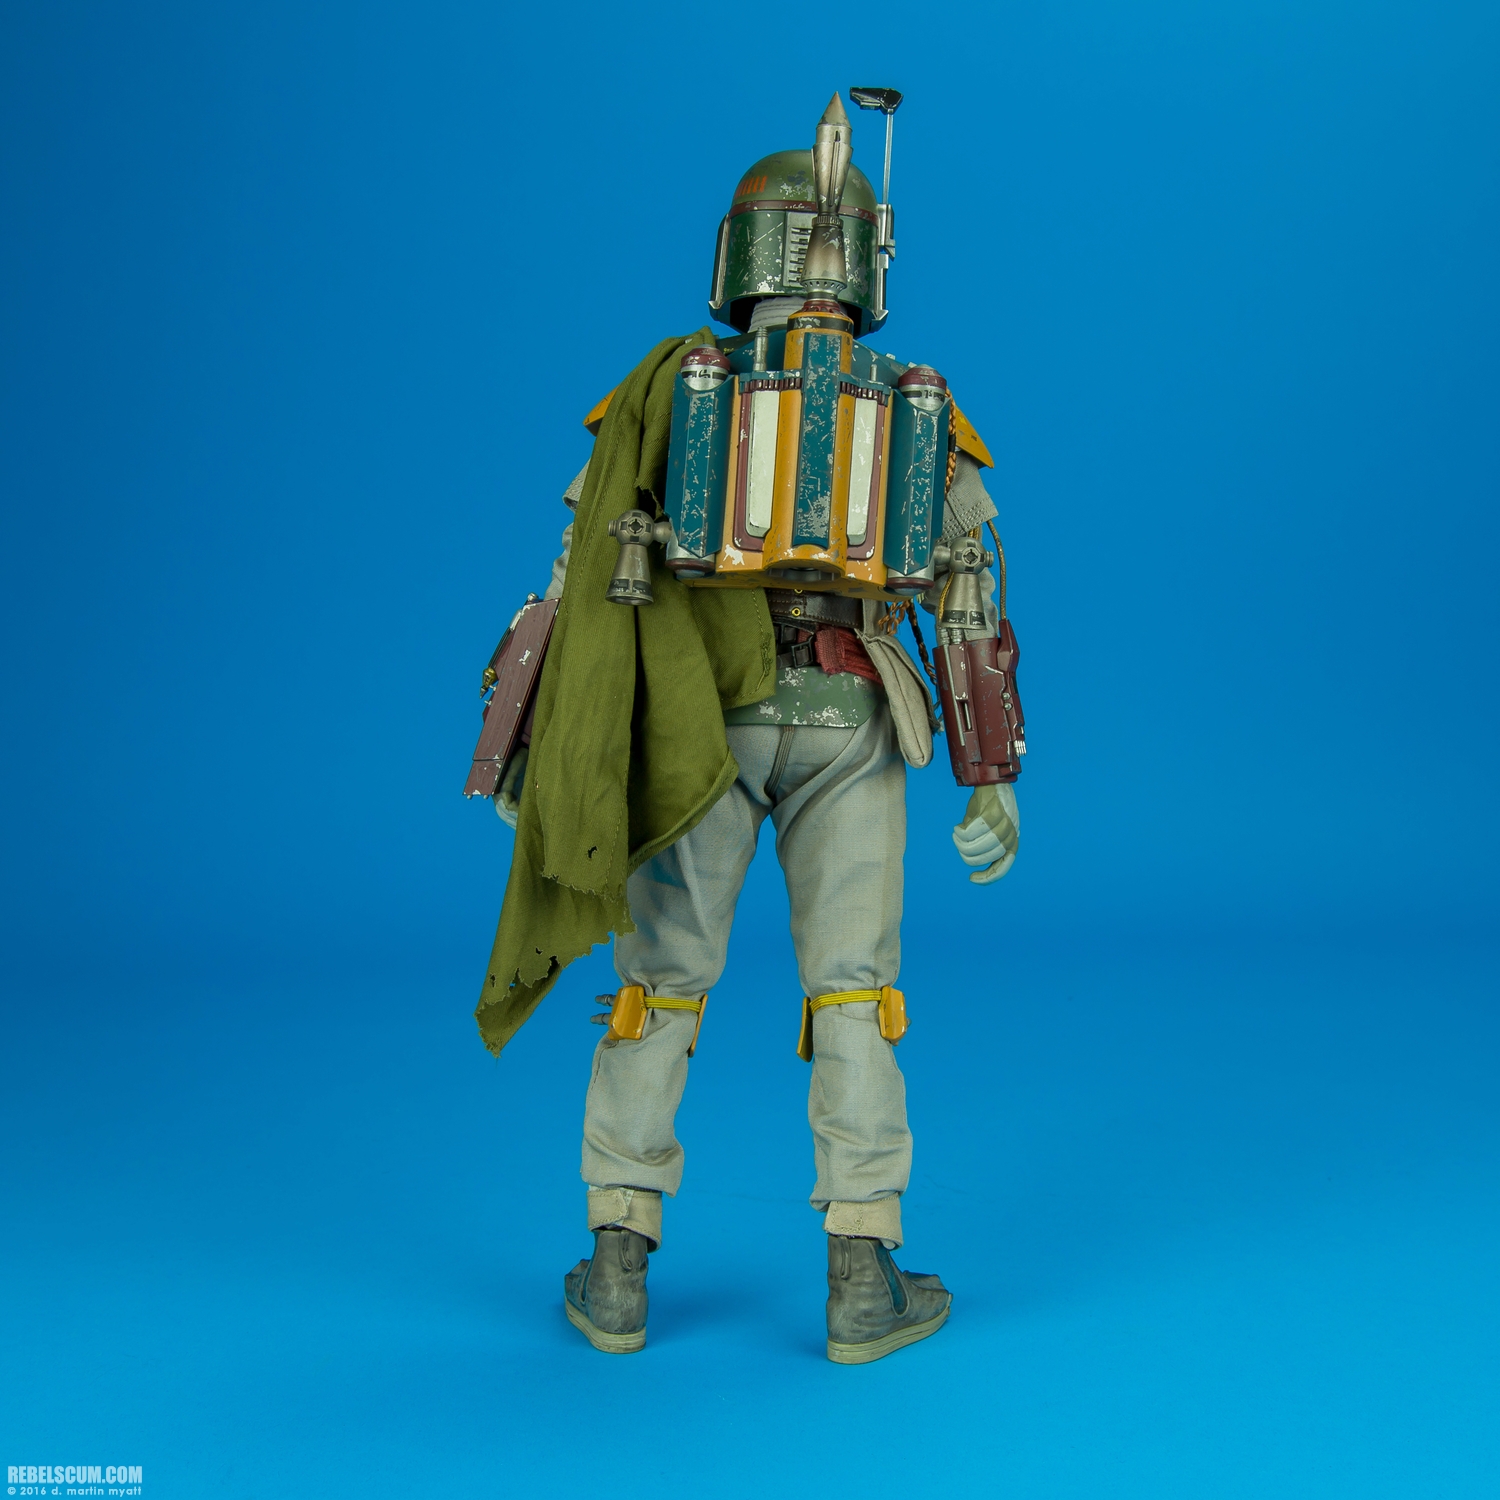 Hot-Toys-MMS313-Boba-Fett-Deluxe-Collectible-Figure-004.jpg